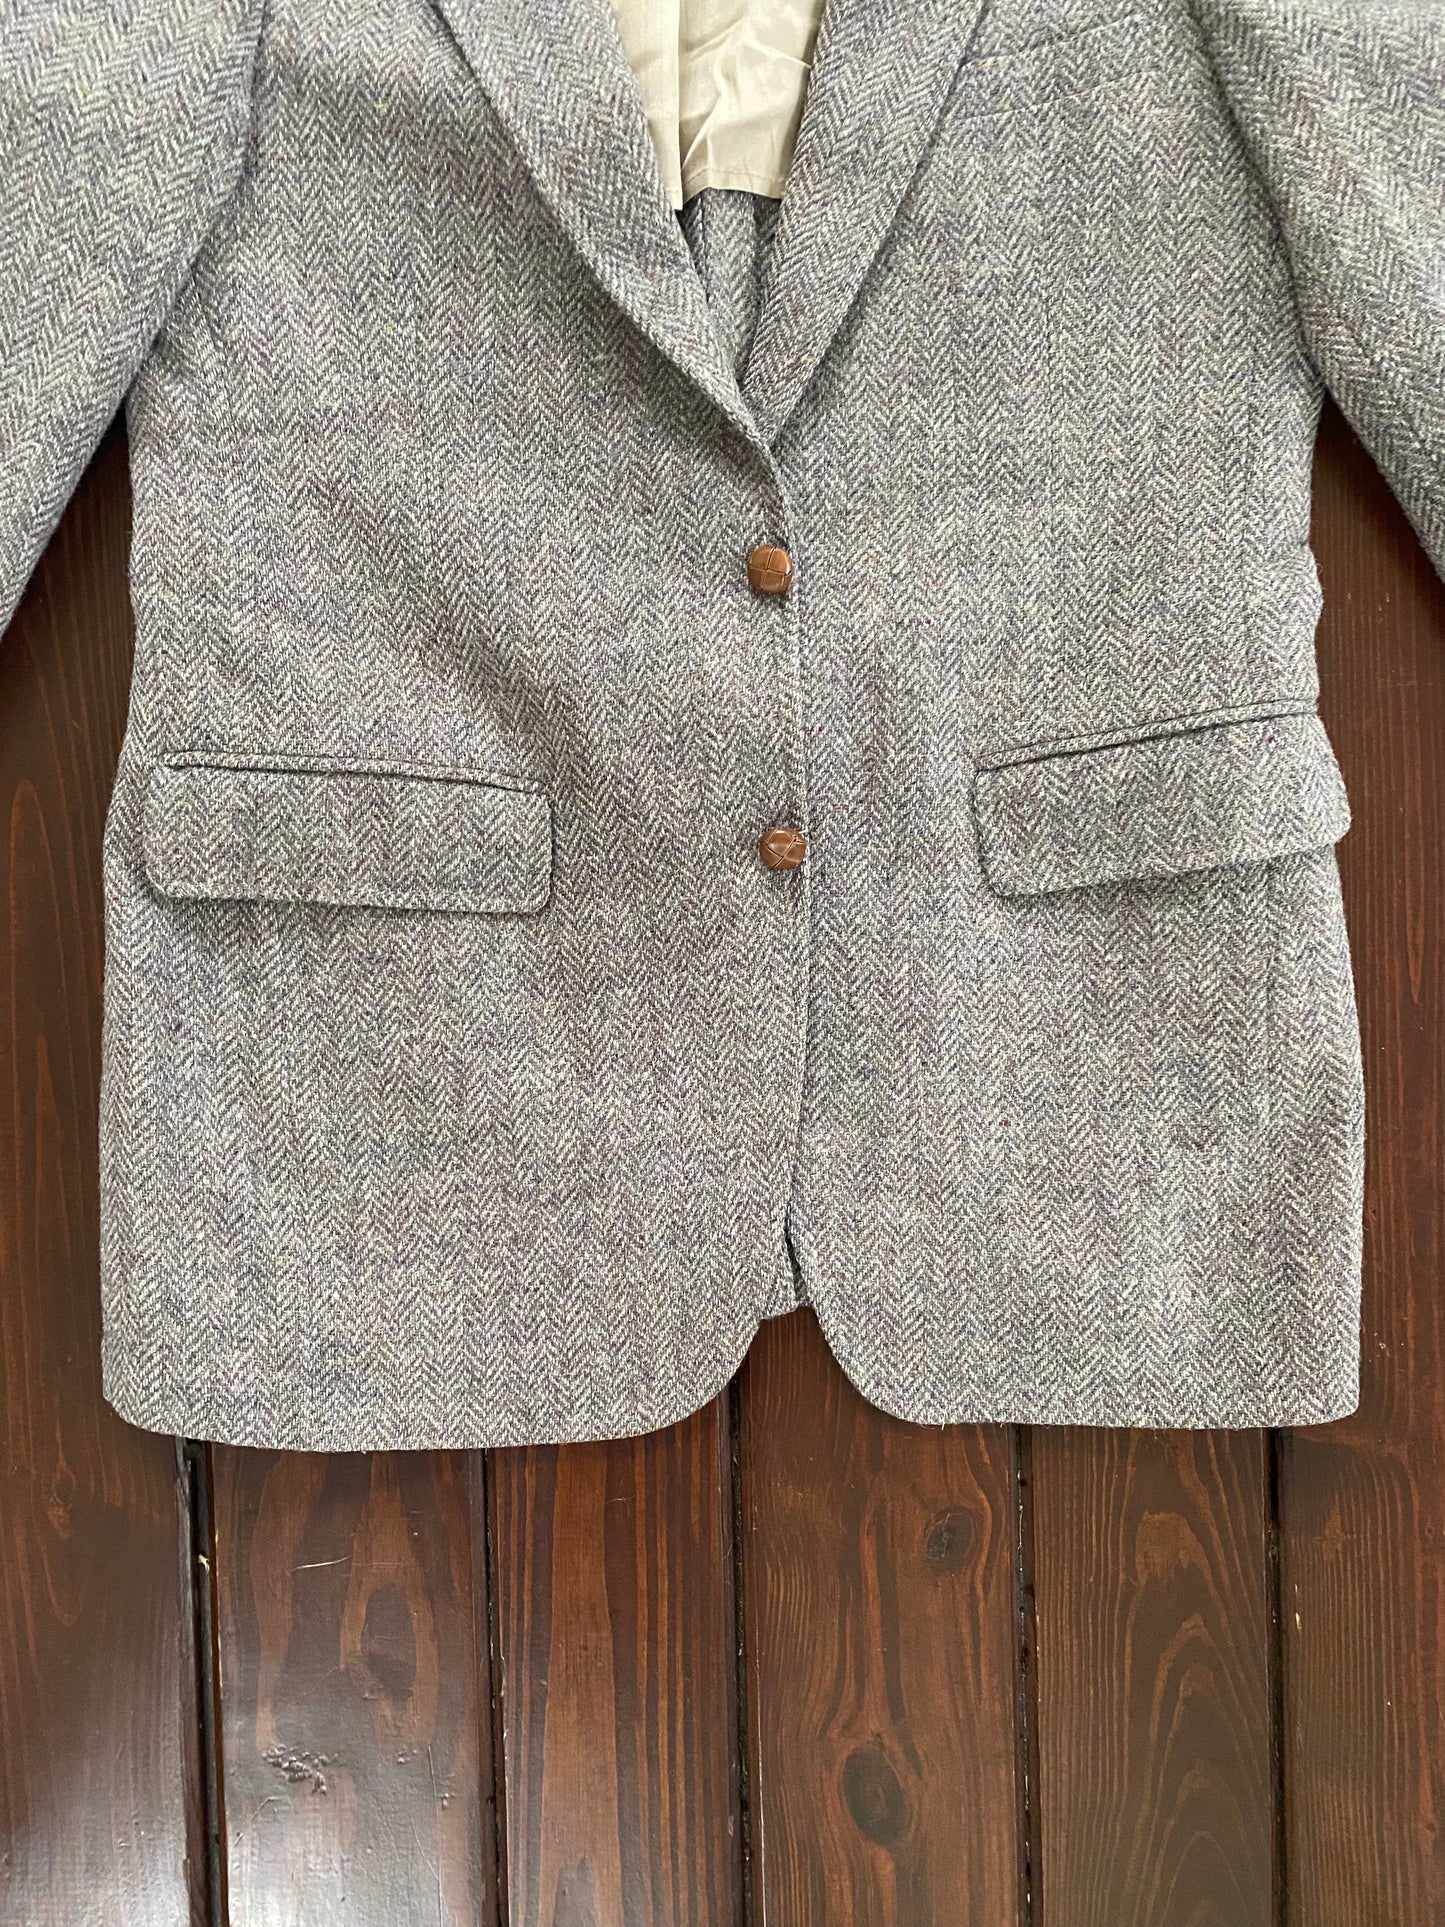 Asher Brown Wool Suit Jacket - Brimm Archive Wardrobe Research